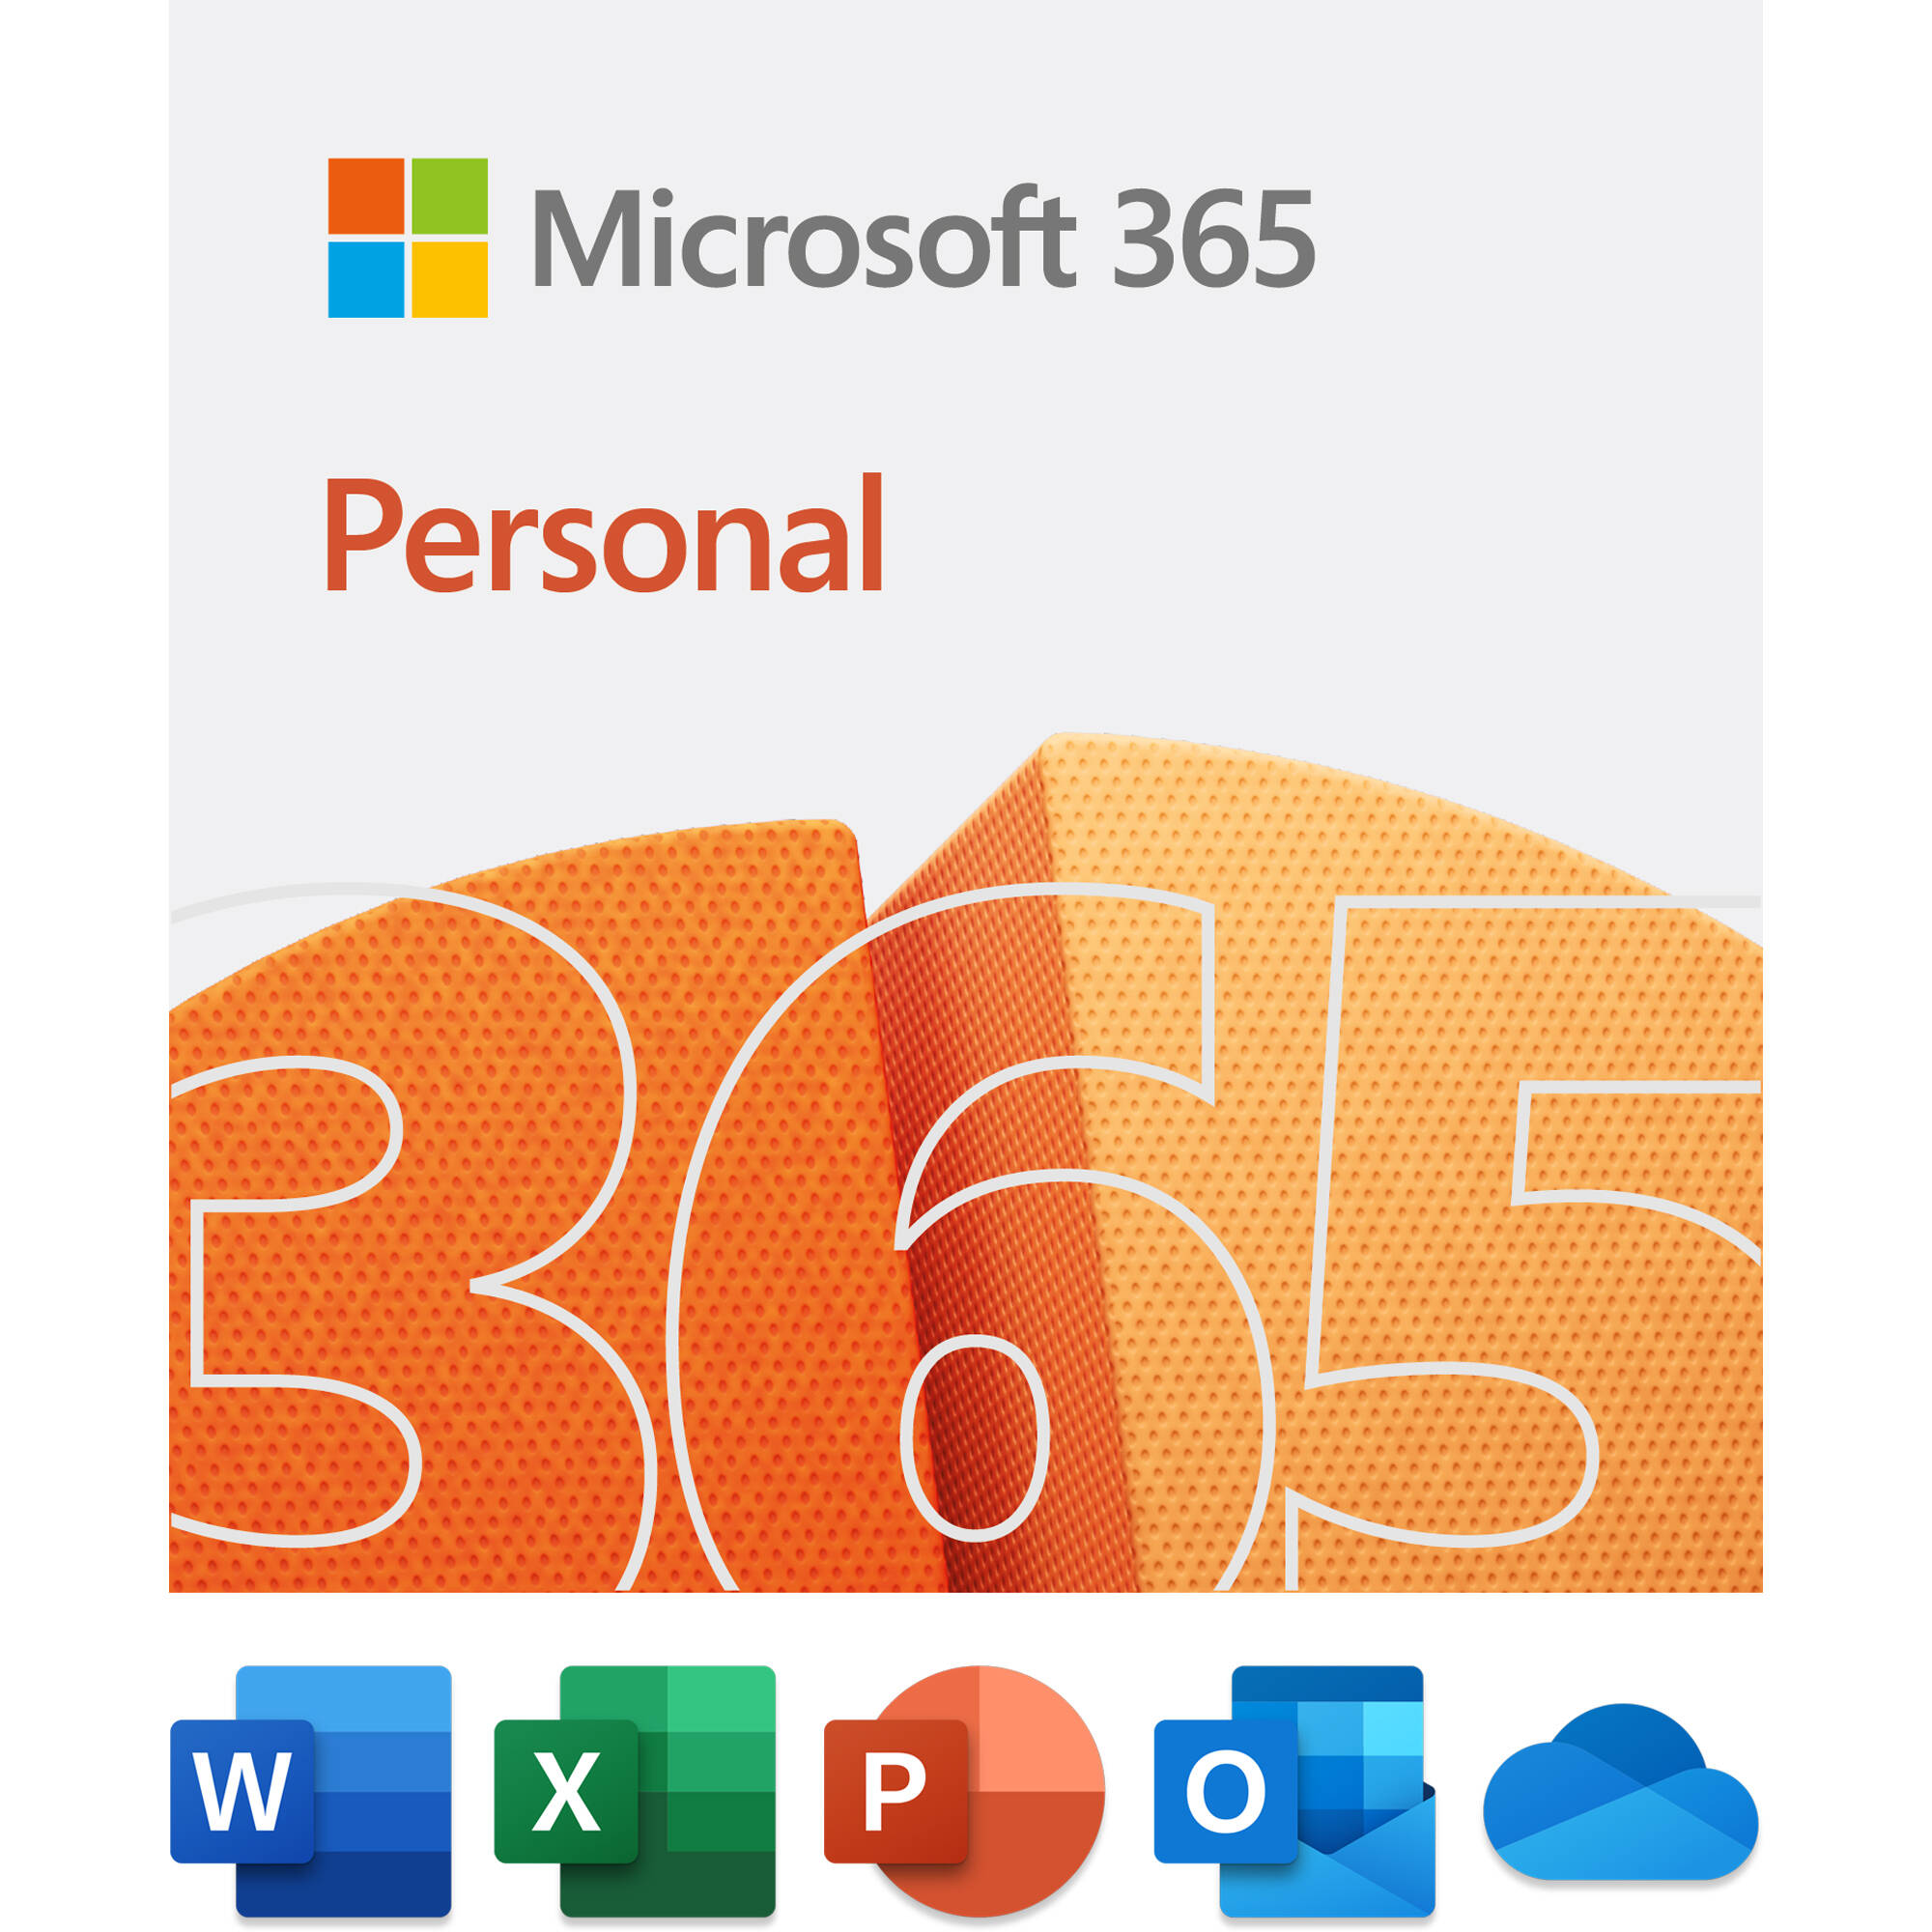 remove office 365 license from windows 10